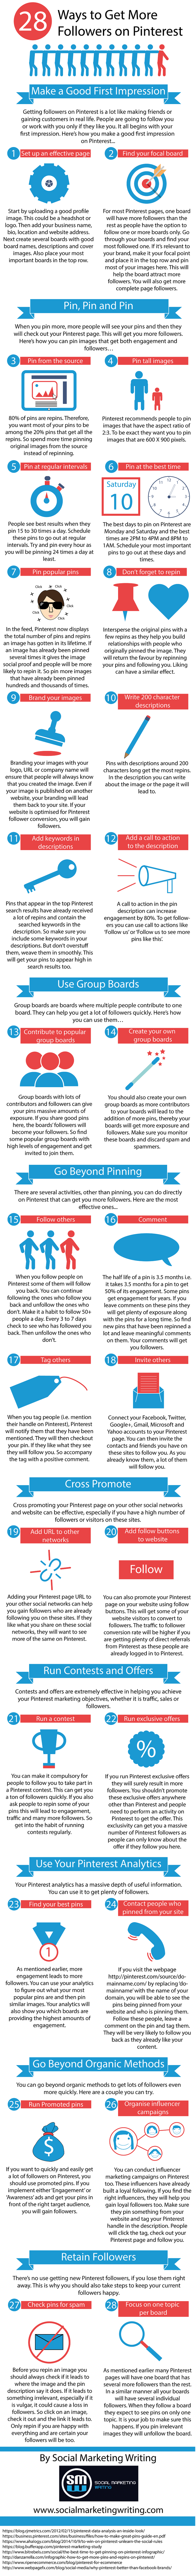 28 Ways to Get More Followers on Pinterest [Infographic]